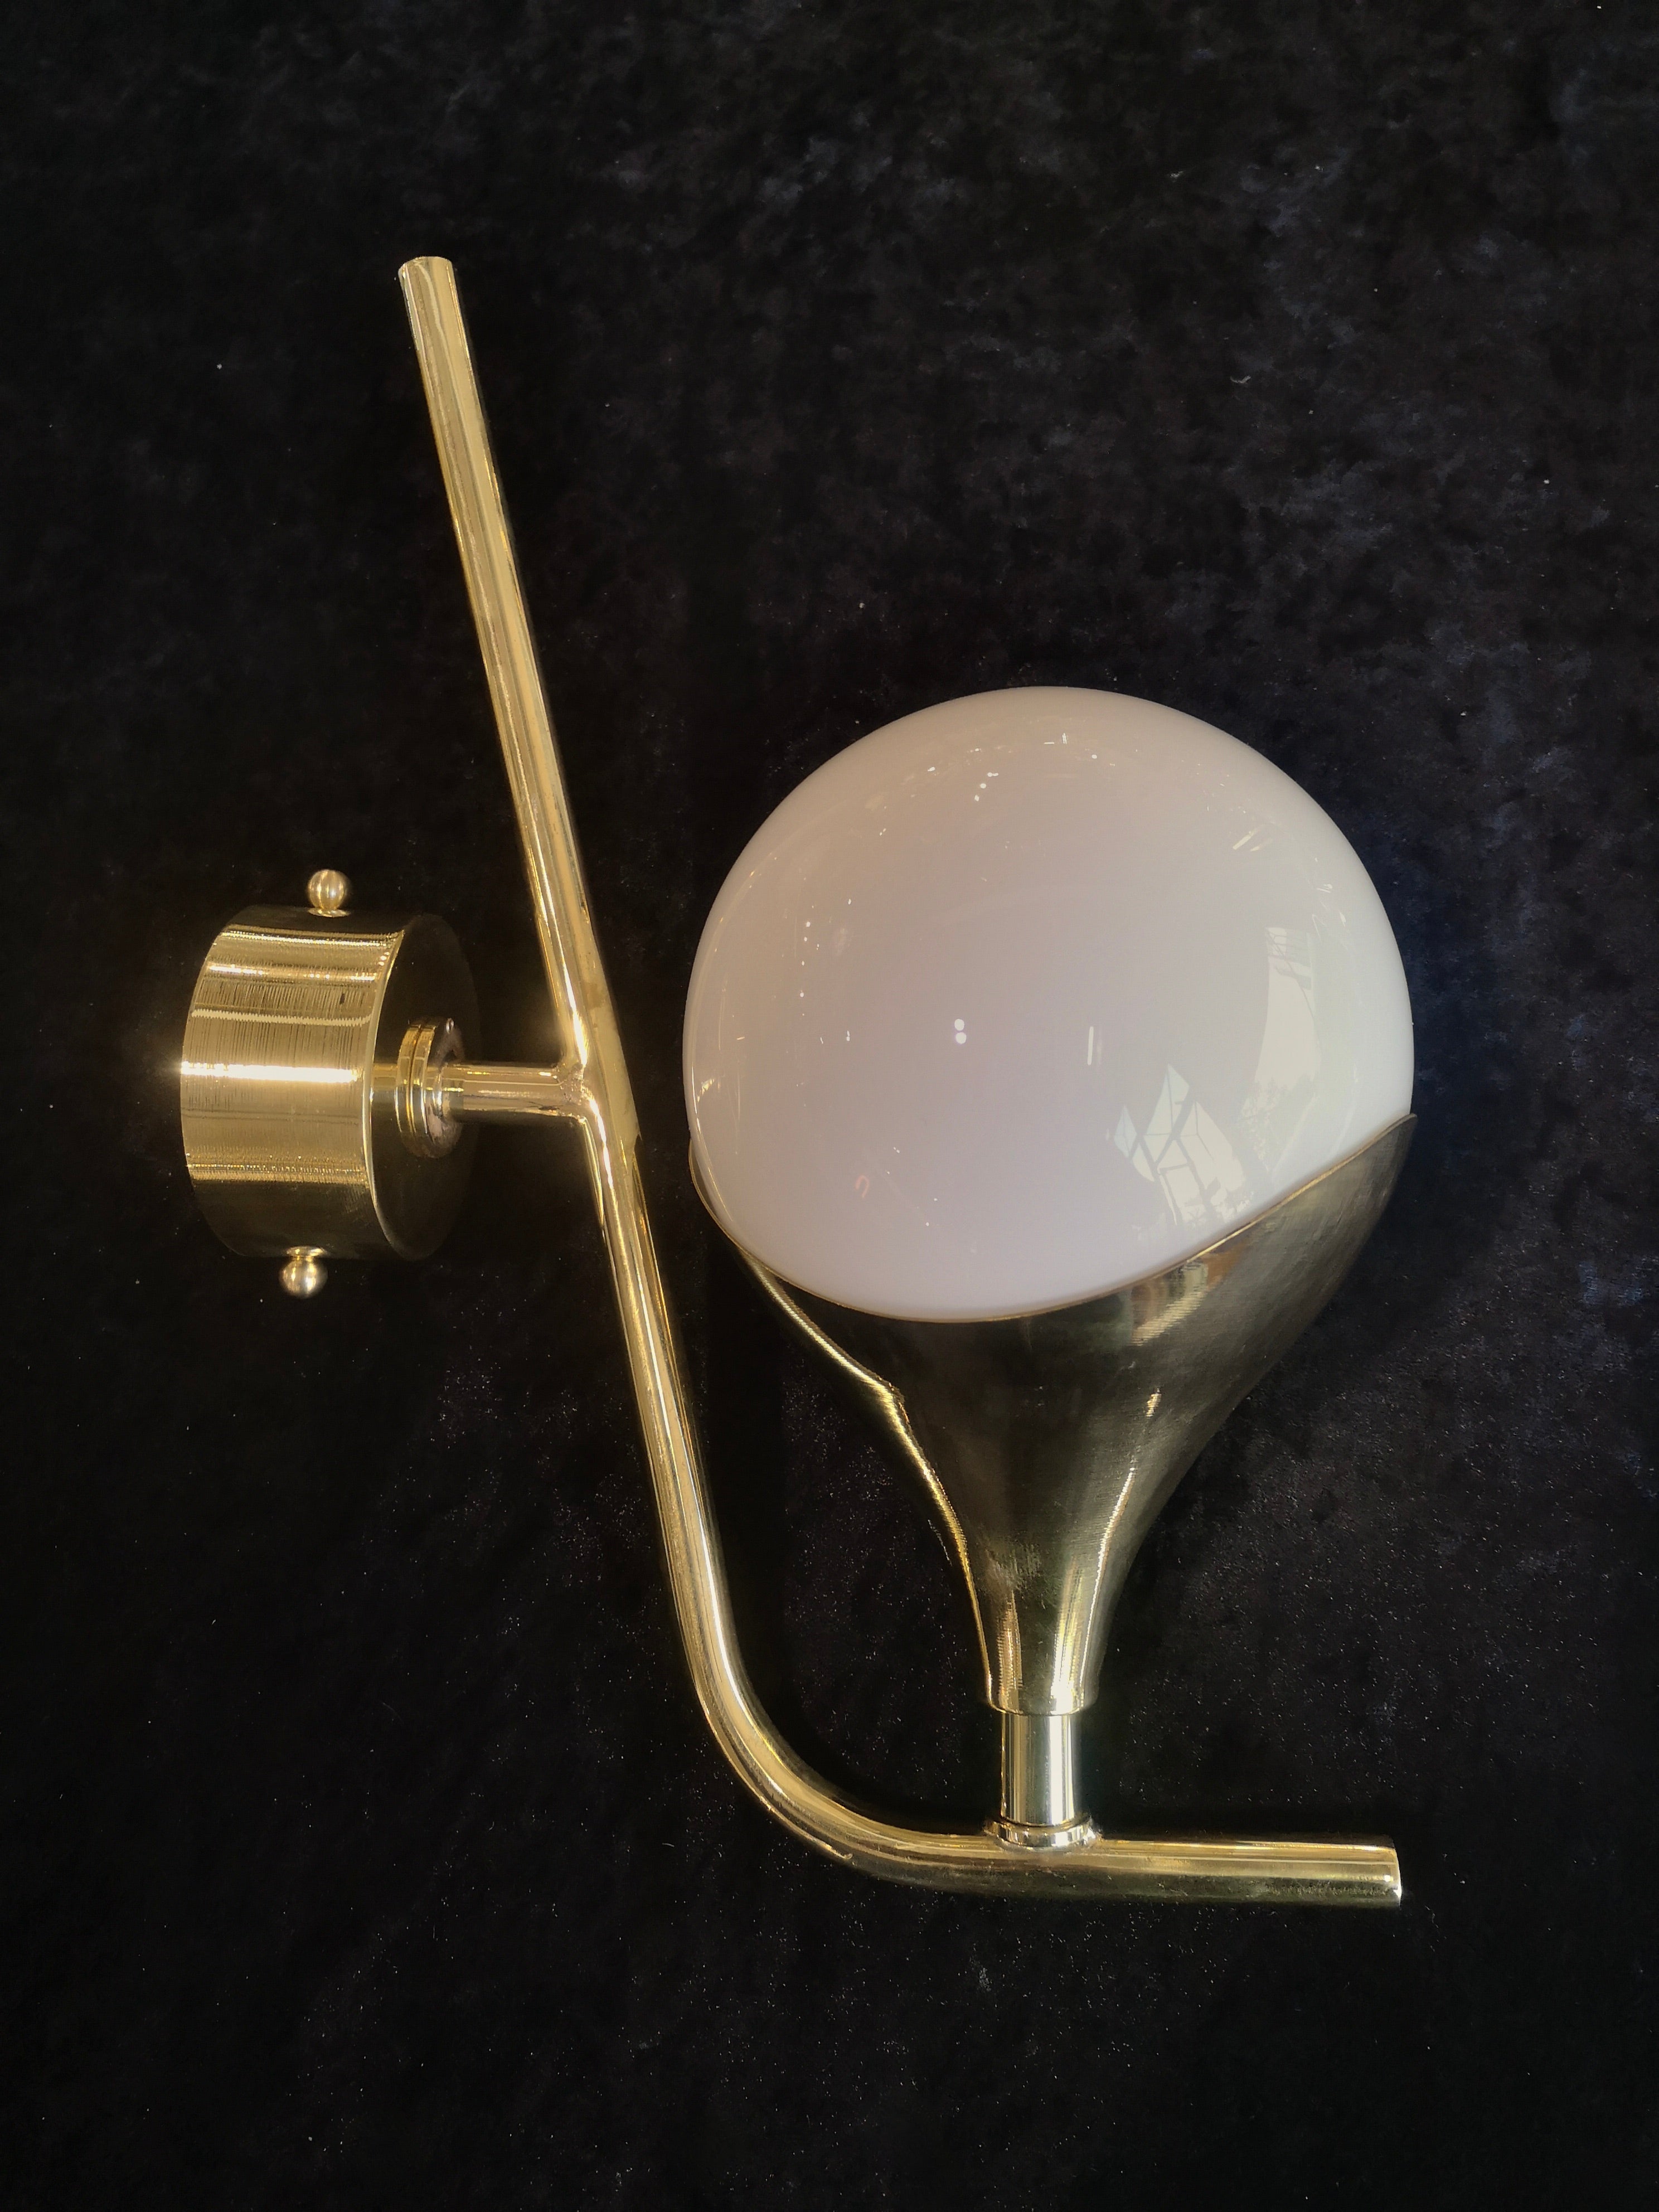 Refined and delicate design for this wall light with white Murano glass.

The applique are made up of a brass structure that allows the housing of a beautiful white Murano glass sphere. The design is very clean and simple, but at the same time gives